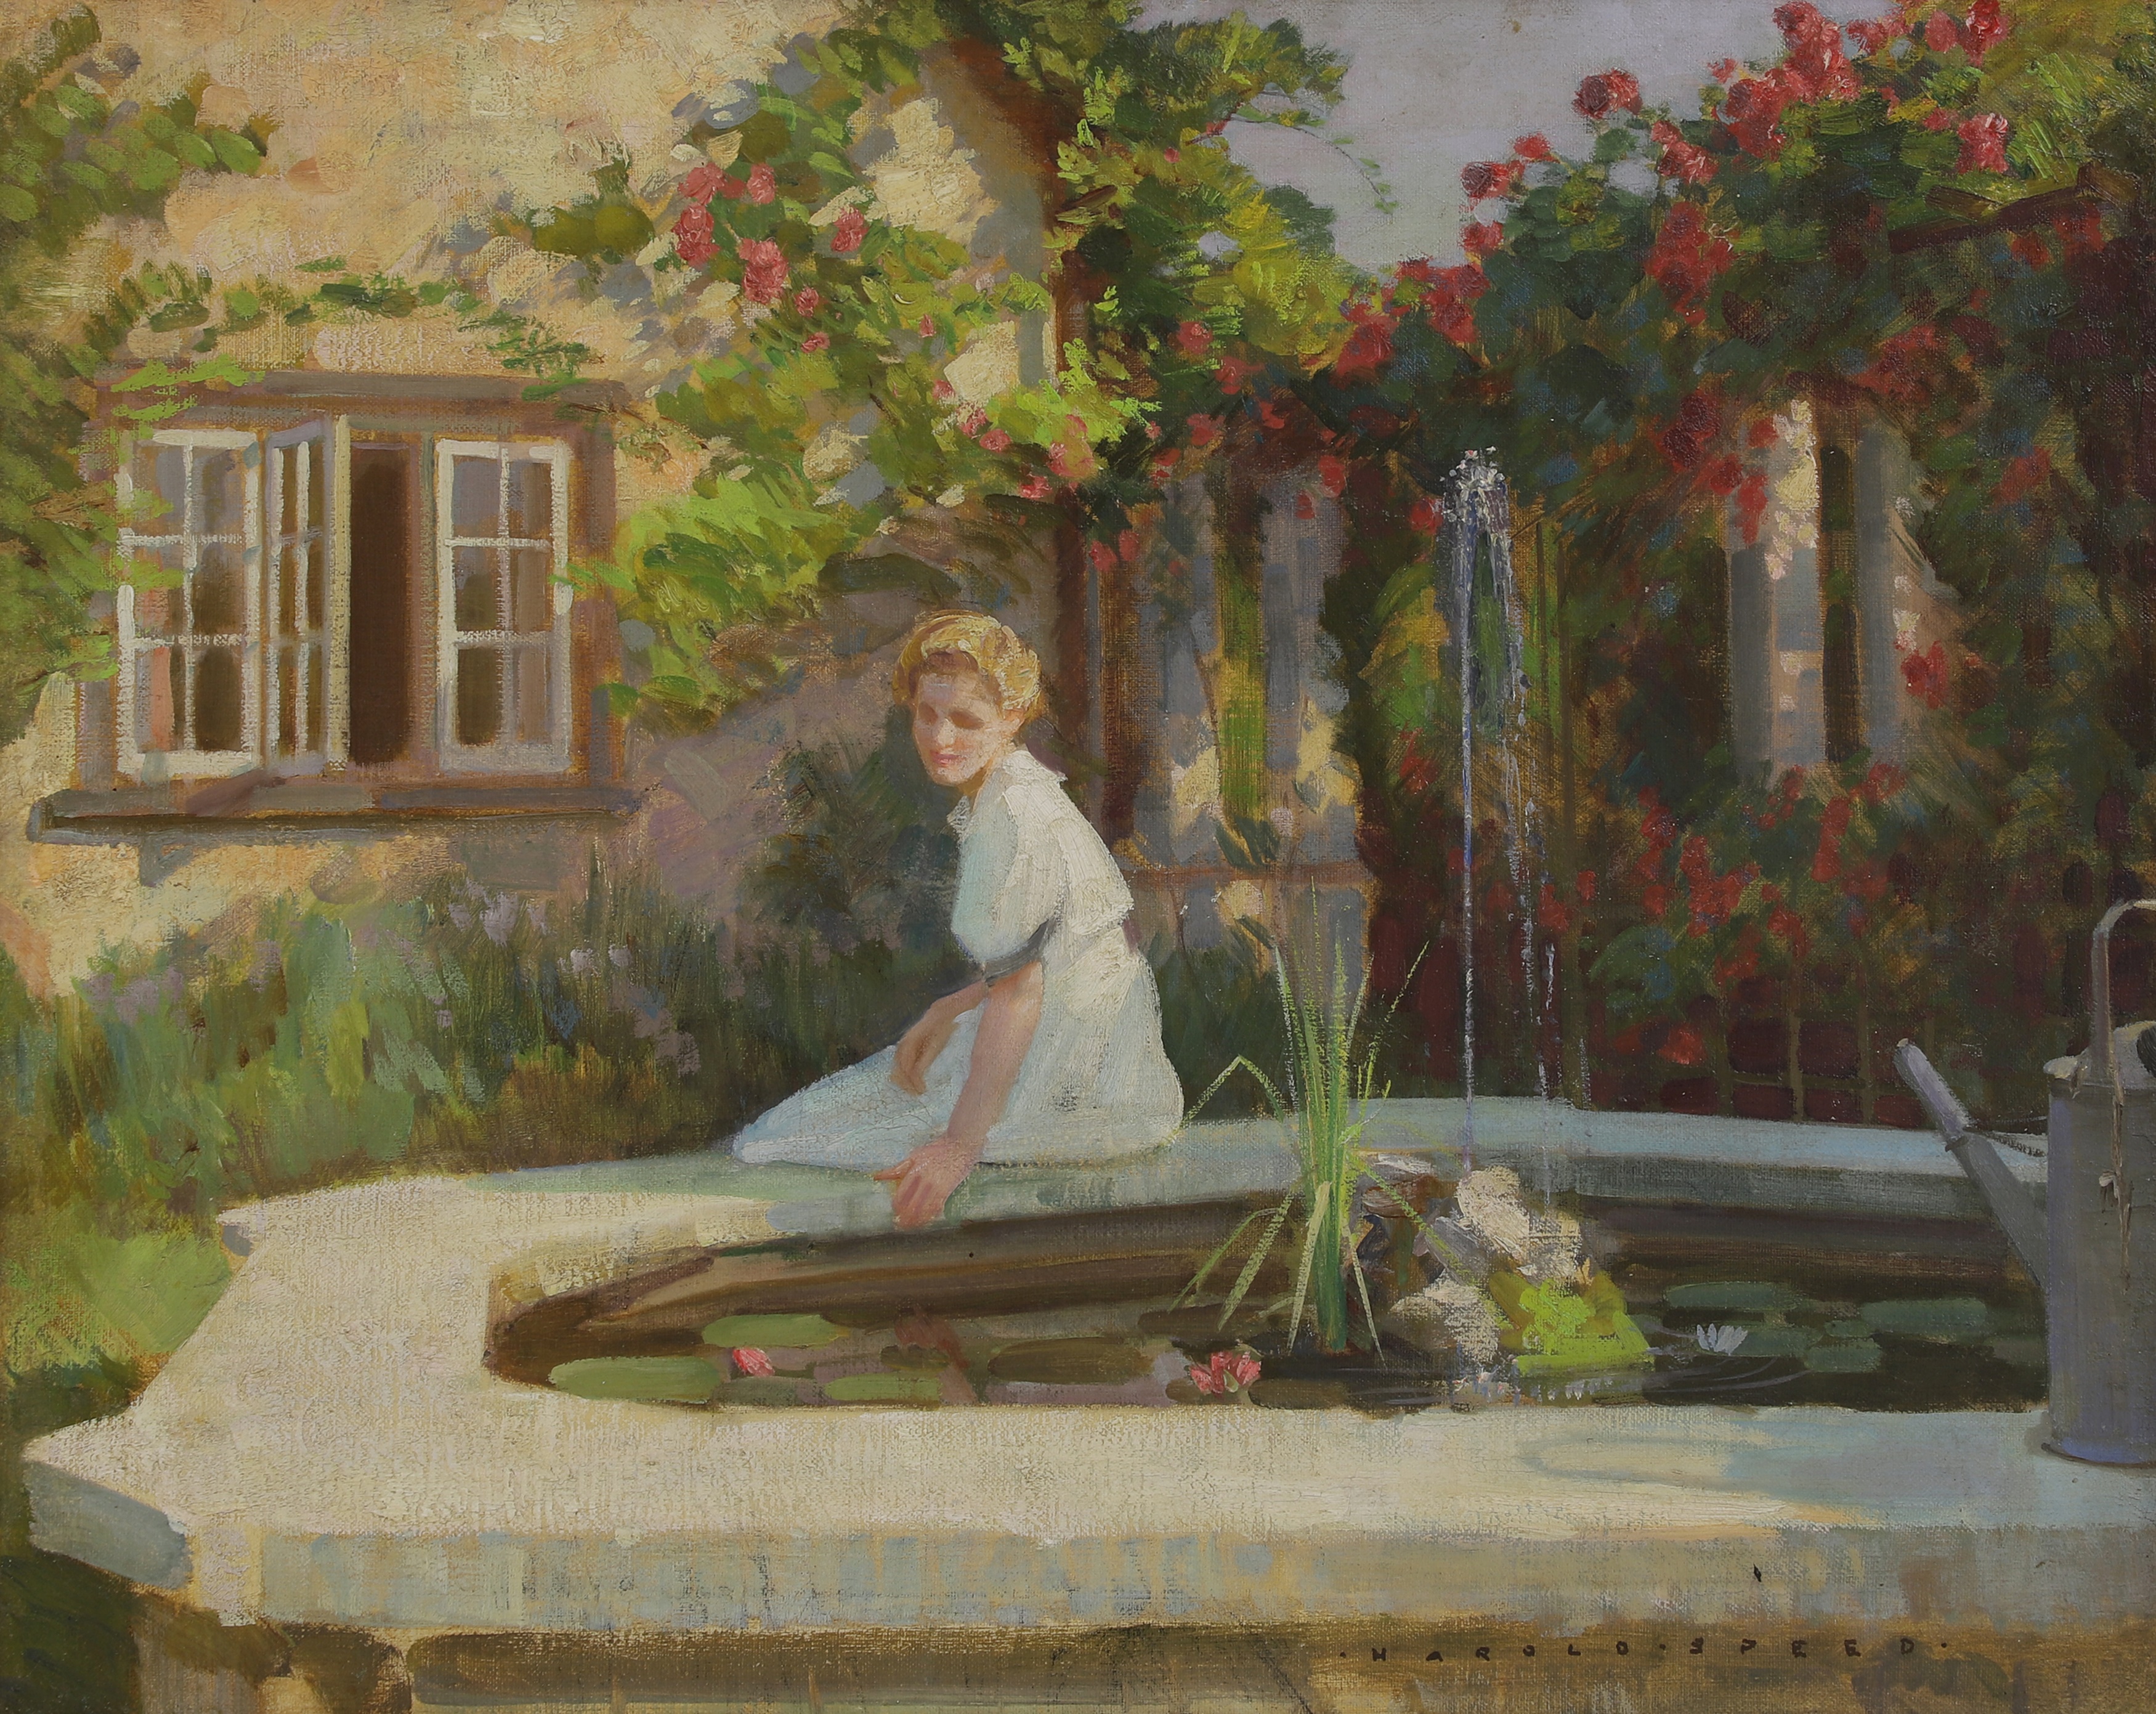 Harold Speed (1872-1957) A woman sitting by a fountain in a cottage garden, signed 'HAROLD SPEED' l.r., oil on canvas, 51 x 63cm (£600-800)